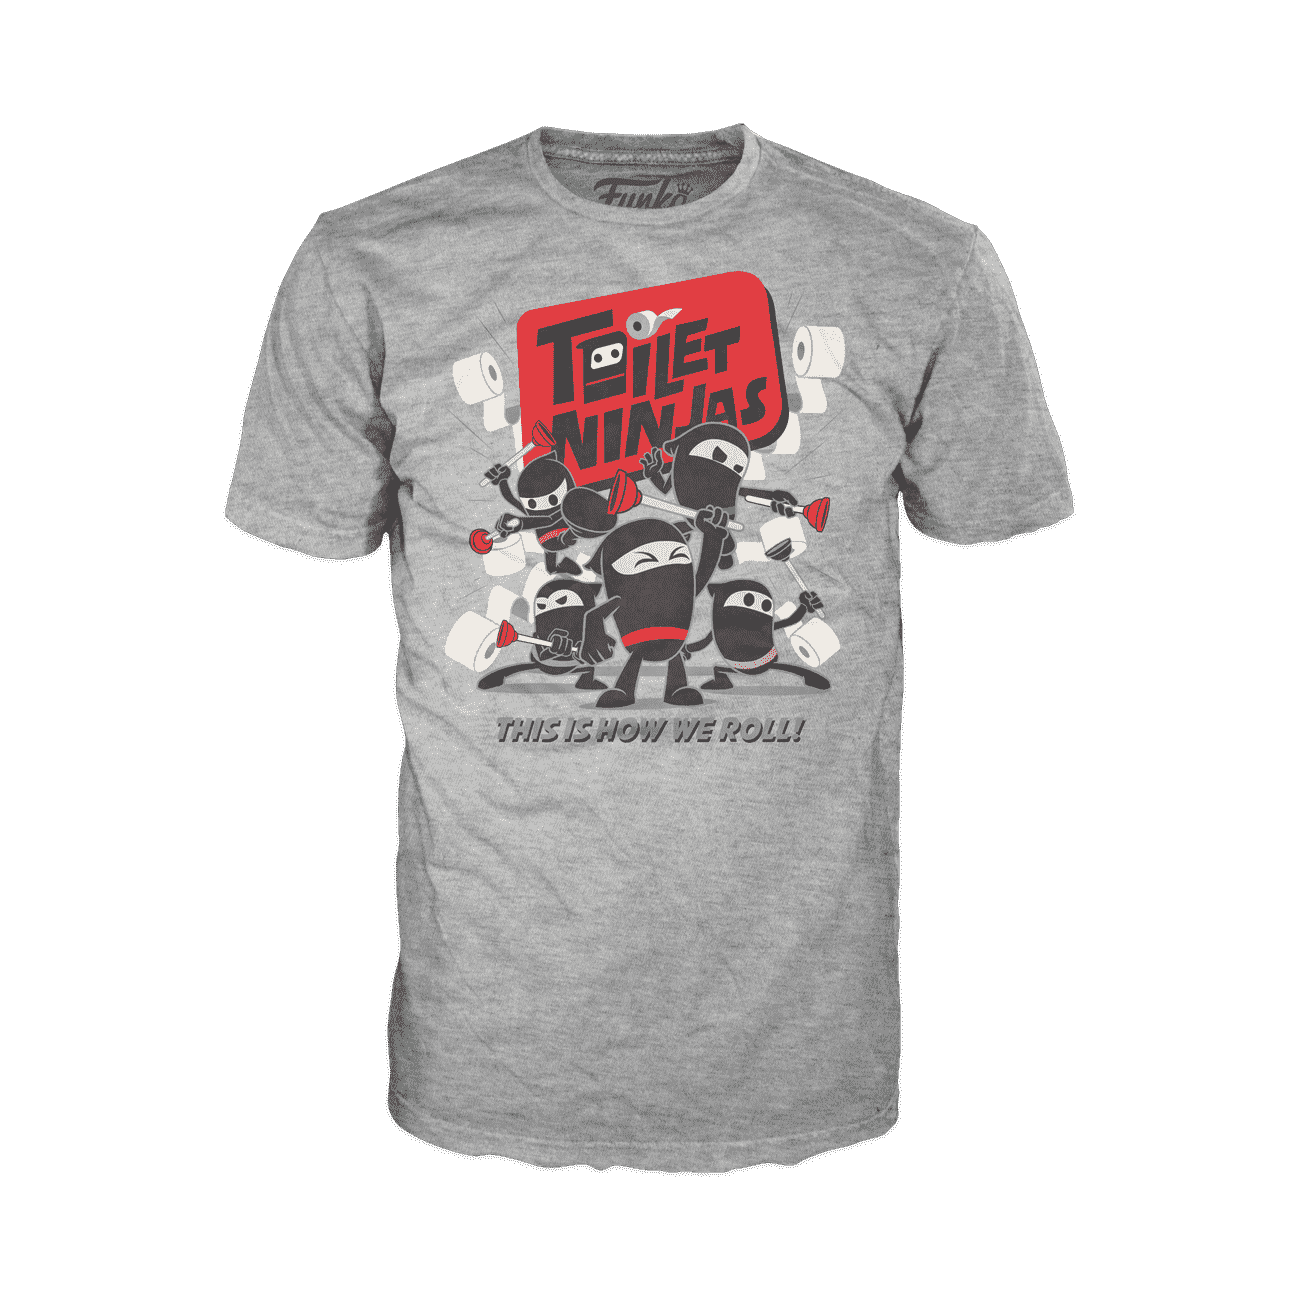 Buy This Is How We Roll Tee at Funko.